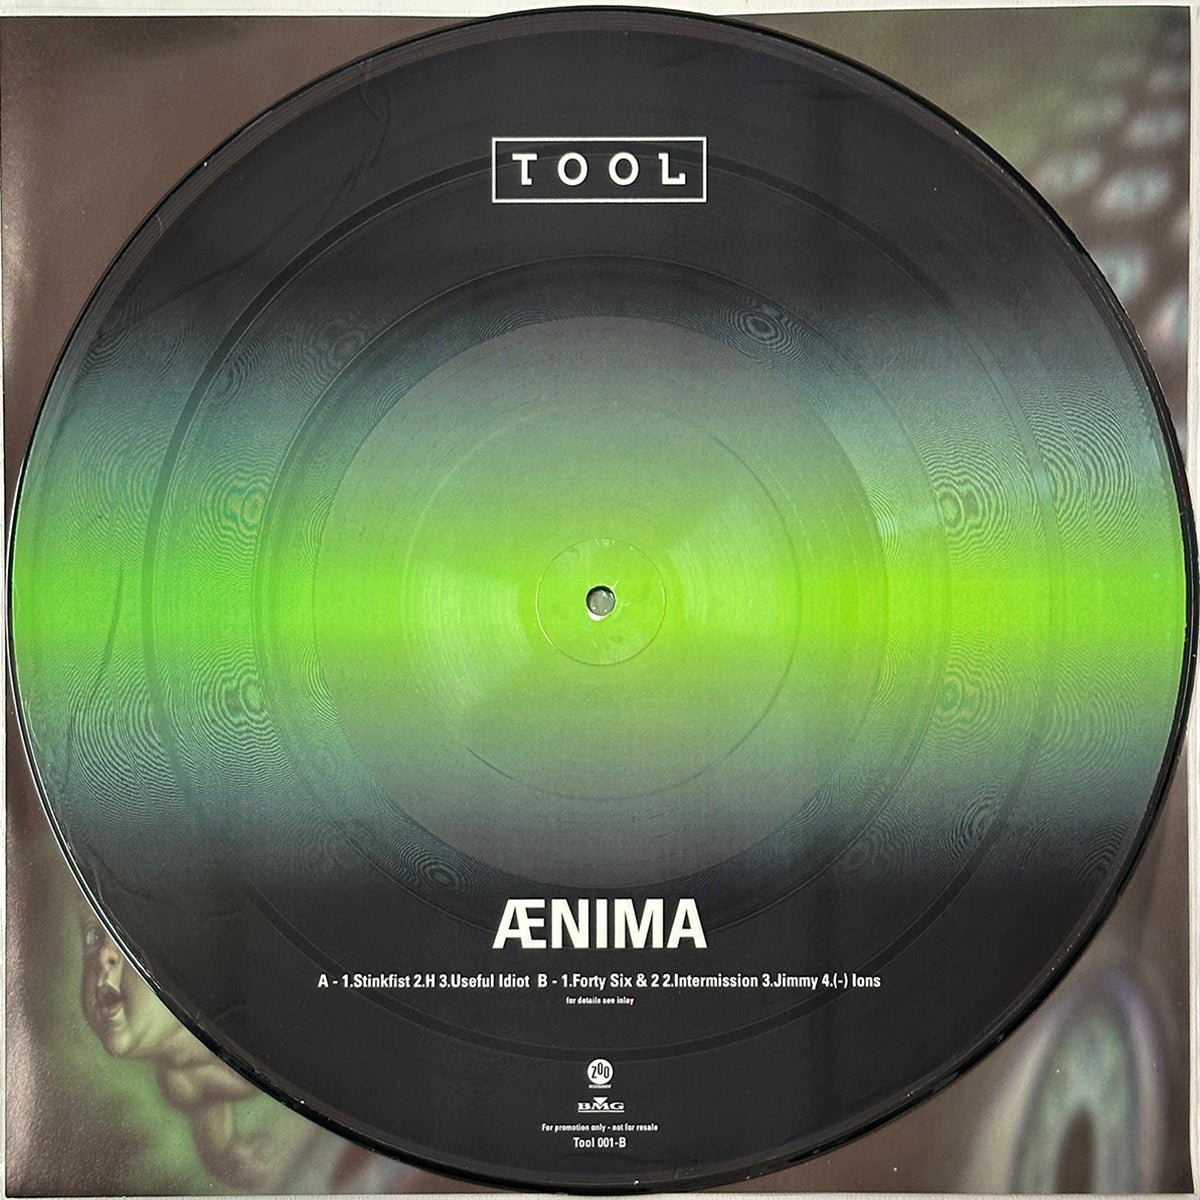 Selections From Ænima